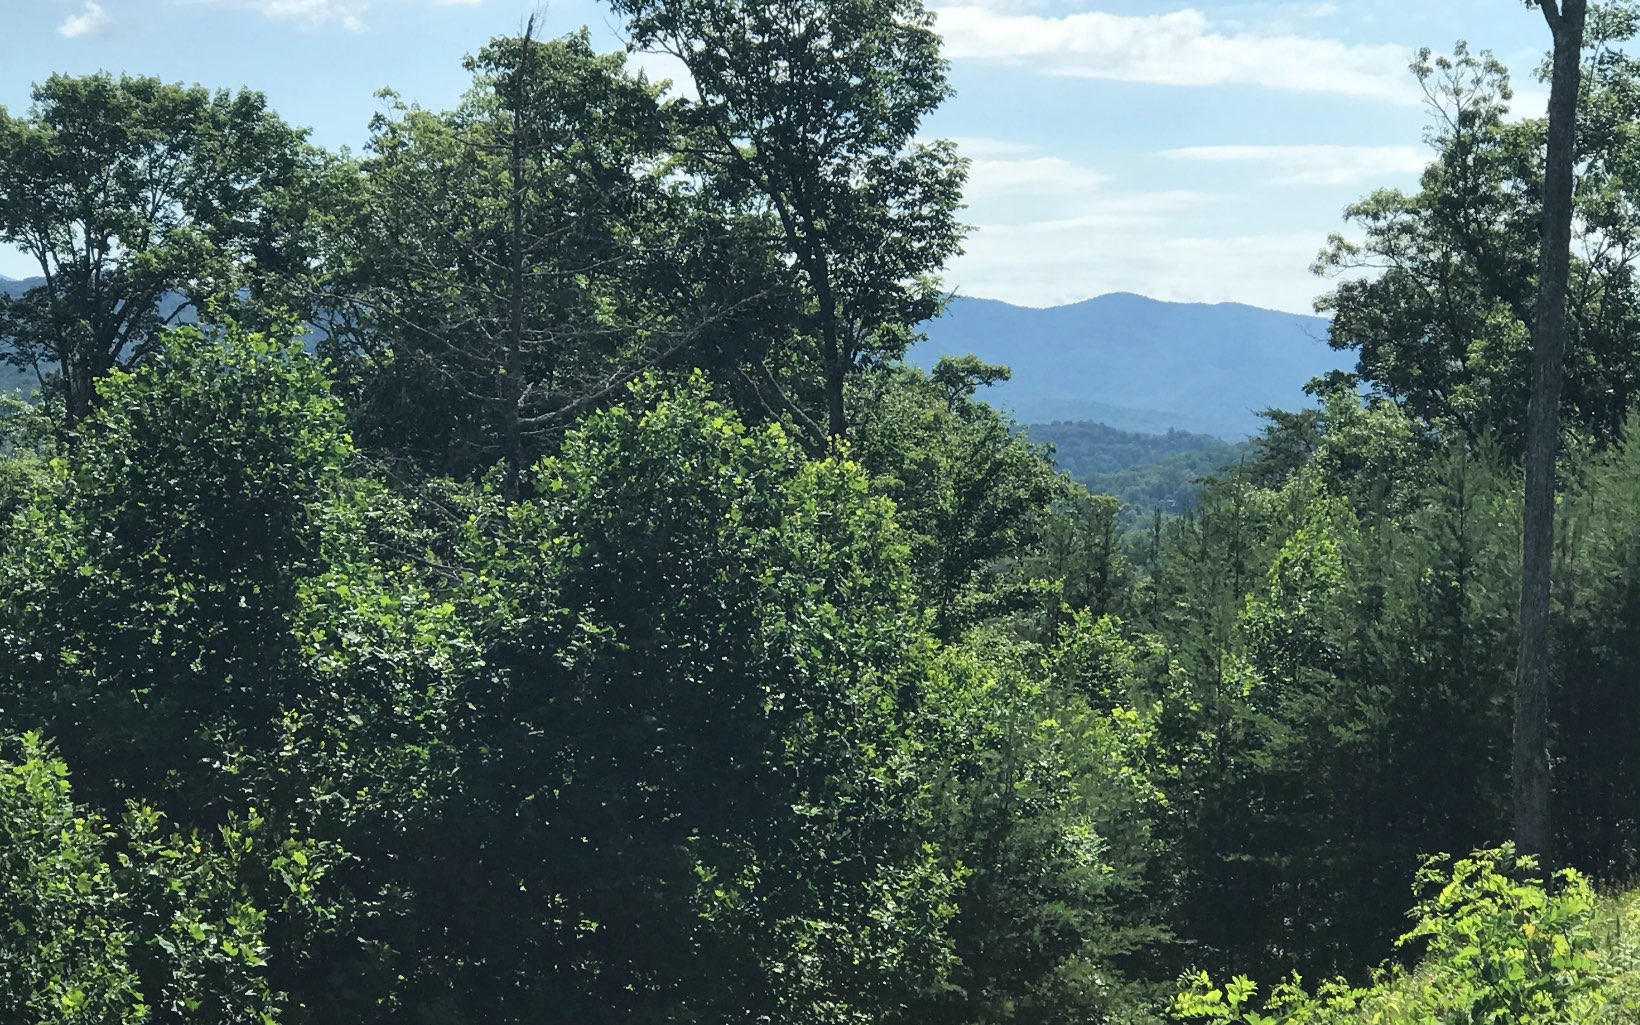 End of the road privacy with seasonal views of Lake Chatuge and surrounding mountains. Nice wooded lot with easy access off the paved street. Minutes from downtown Hiawassee and Lake Chatuge. Enjoy all the area has to offer. Build your mountain dream home!!